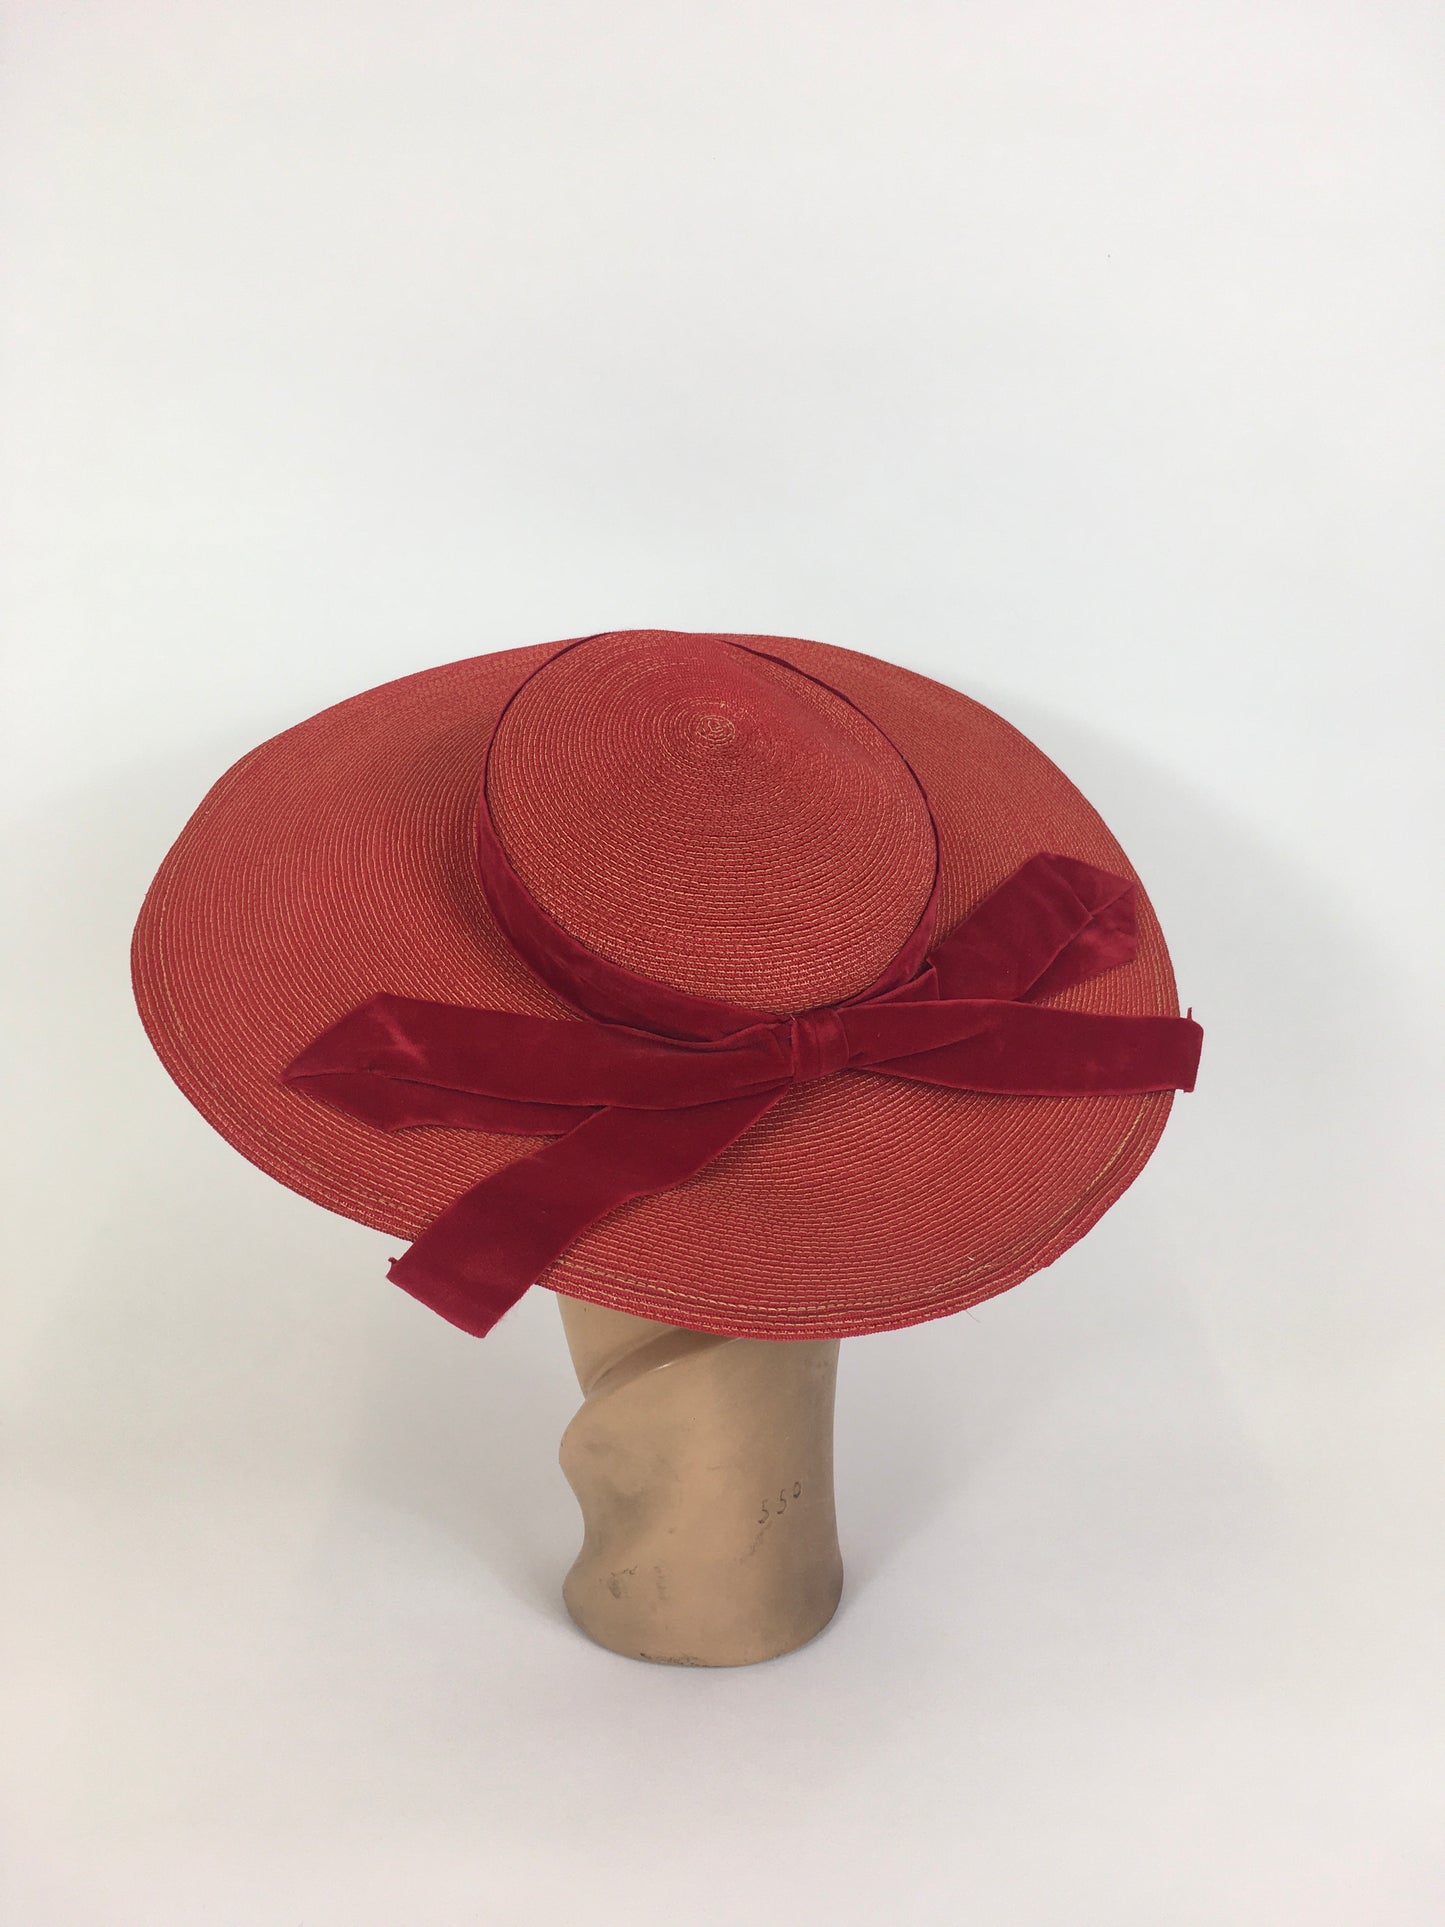 Original 1940’s SENSATIONAL Large Straw Hat - In Red With Contrasting Velvet Bow Trim